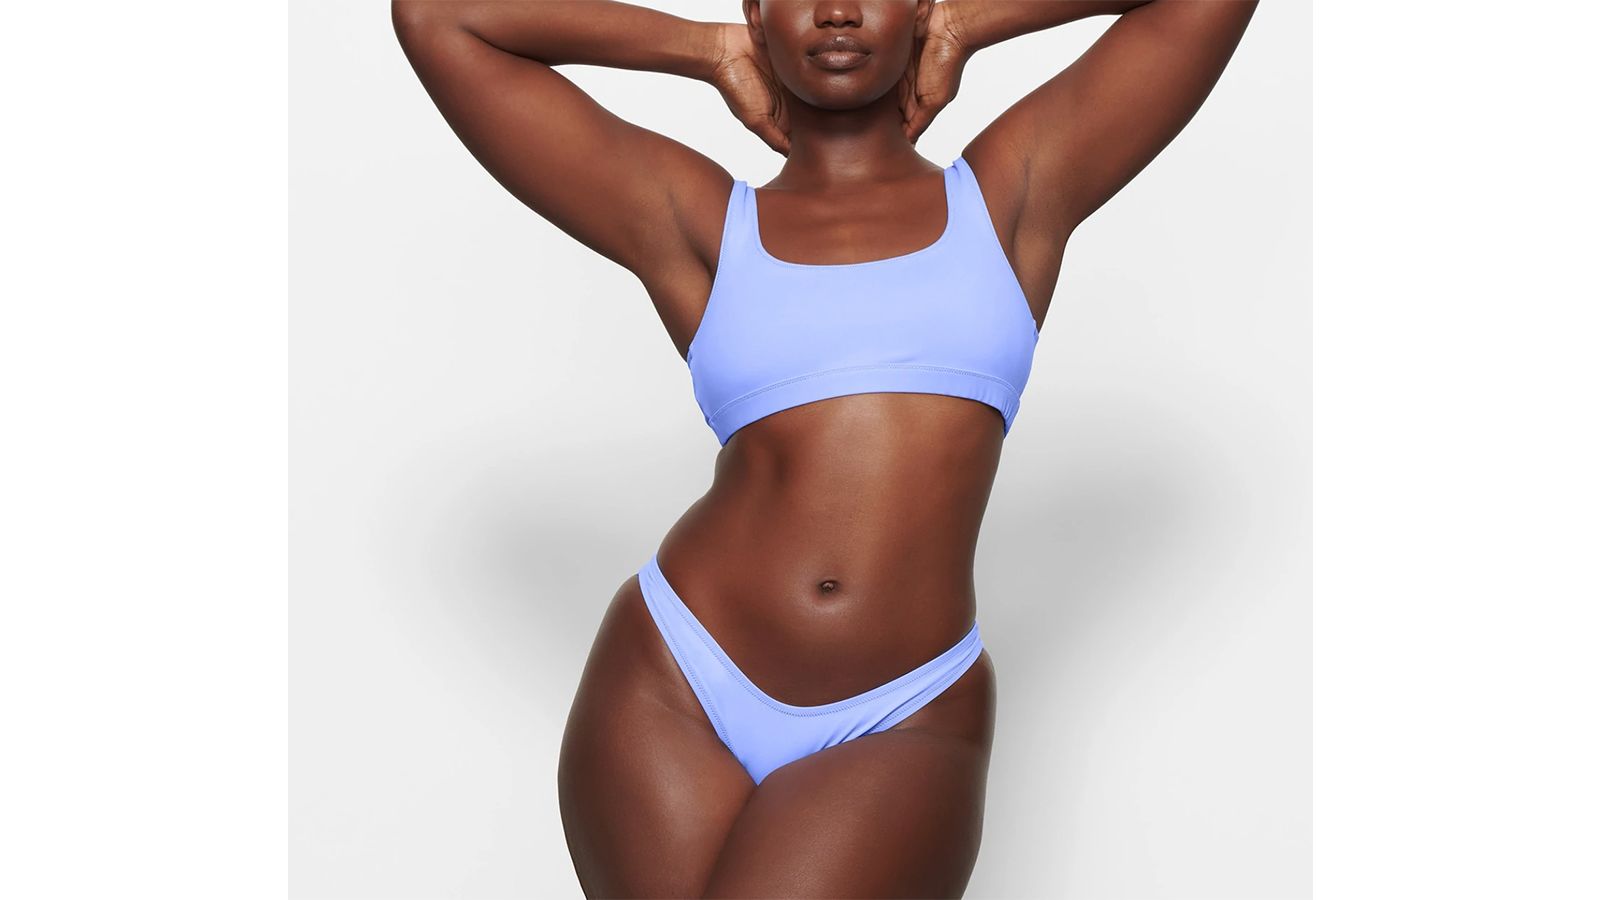 JUST LAUNCHED: SKIMS Swim. The wait is over: our most anticipated